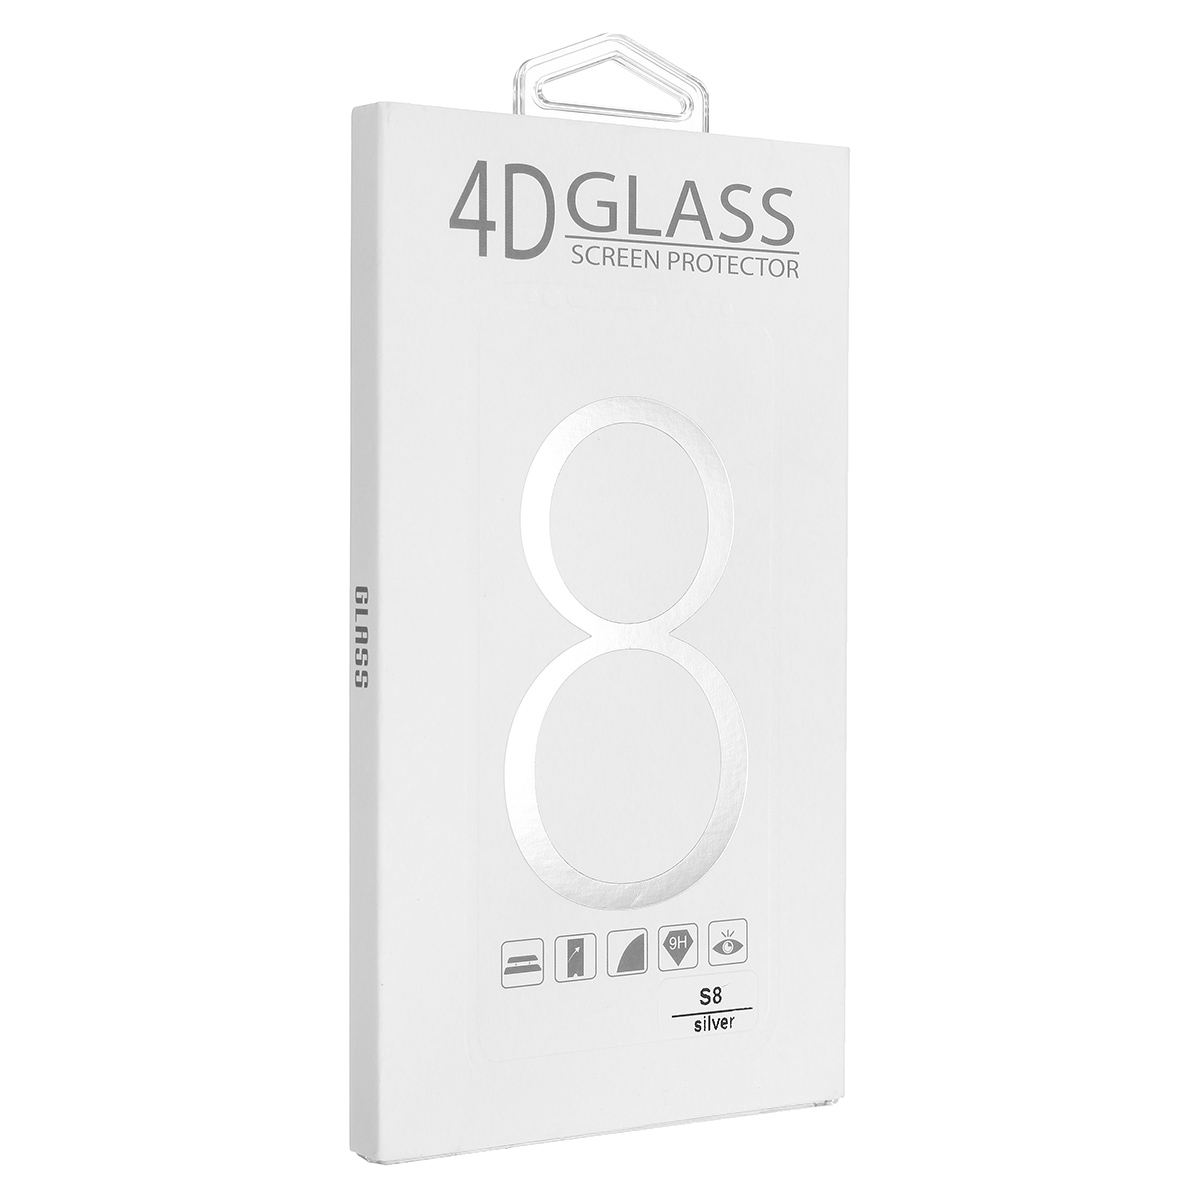 3D-Arc-Edge-026mm-Tempered-Glass-Silk-Screen-Rim-Screen-Protector-for-Samsung-Galaxy-S8-amp-S8-Plus-1149014